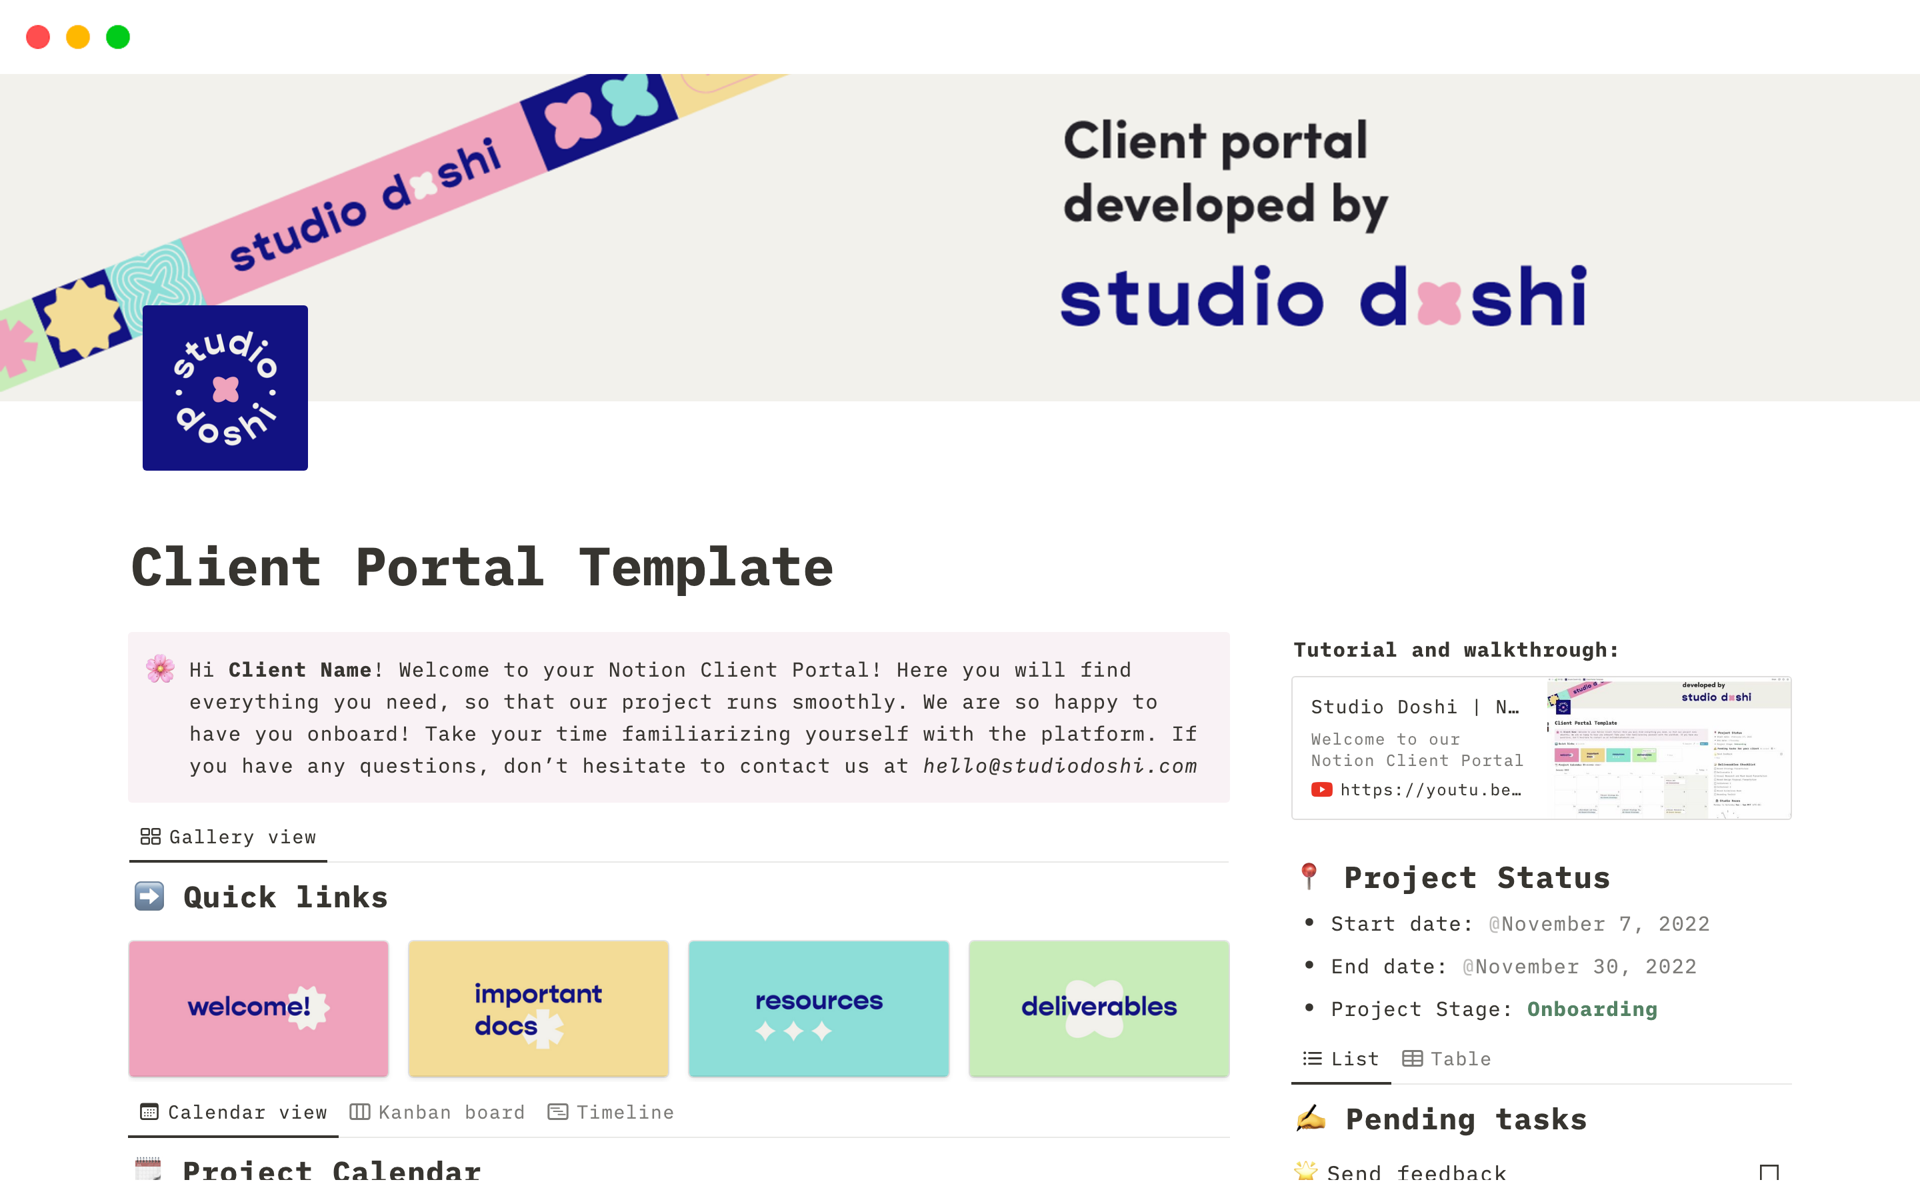 Our Notion Client Portal is the perfect template to elevate your client experience and project workflow.